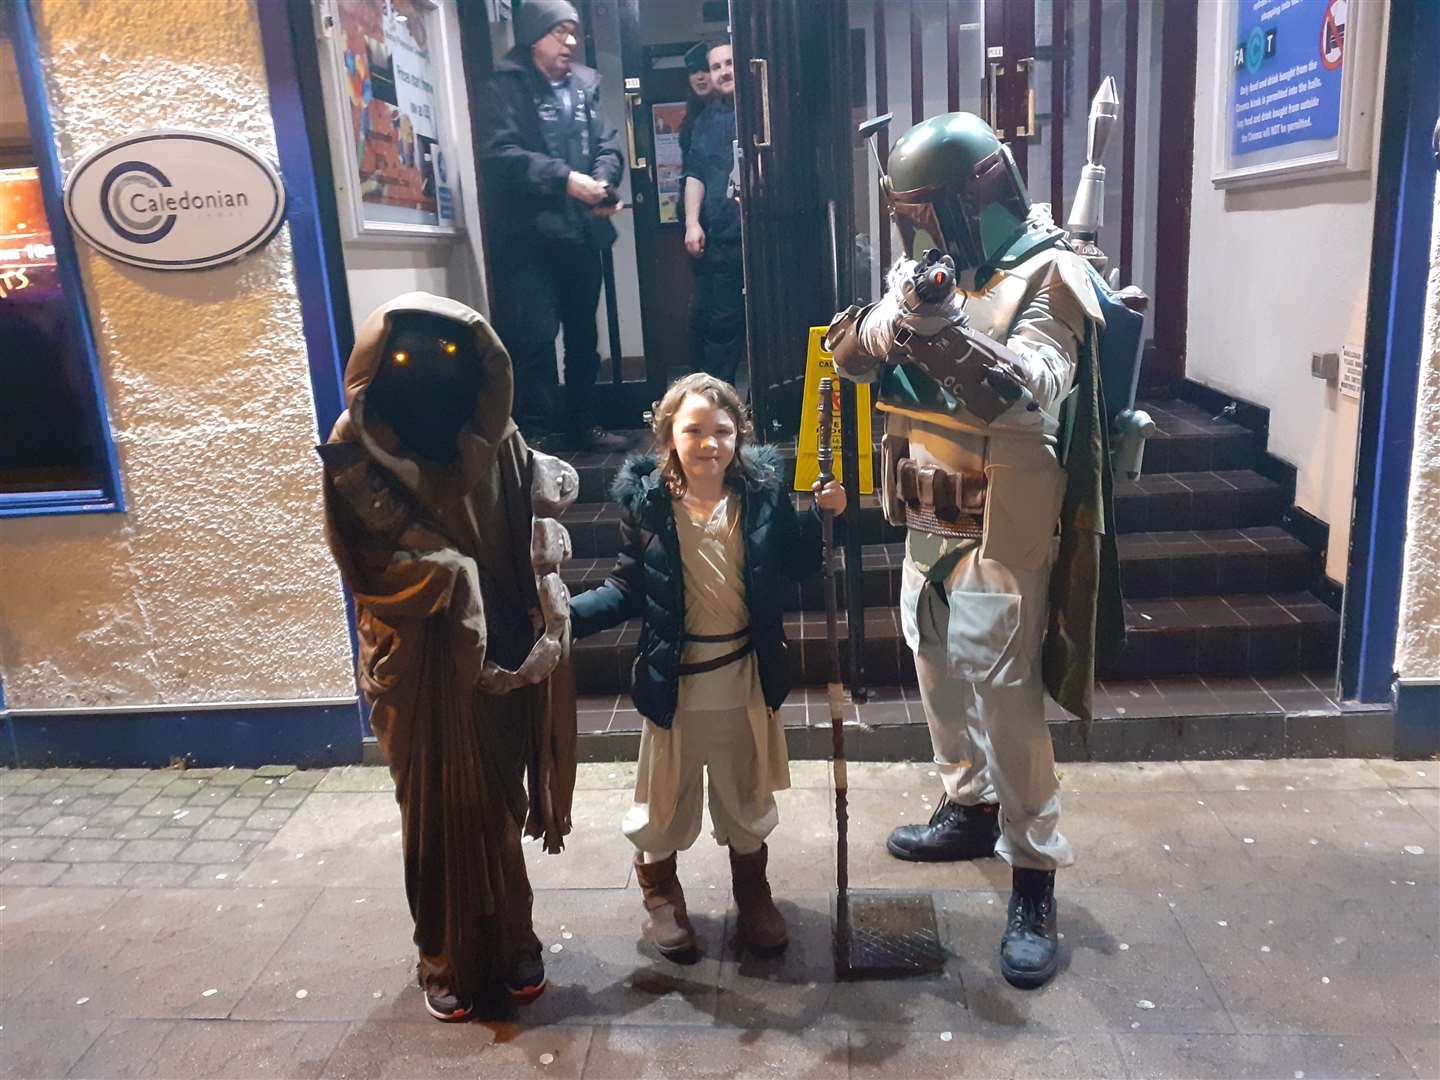 Nicole, Caitlyn and Mark dressed as a Jawa, Rey Skywalker and Boba Fett for the latest Star Wars premiere at the Moray Playhouse cinema.